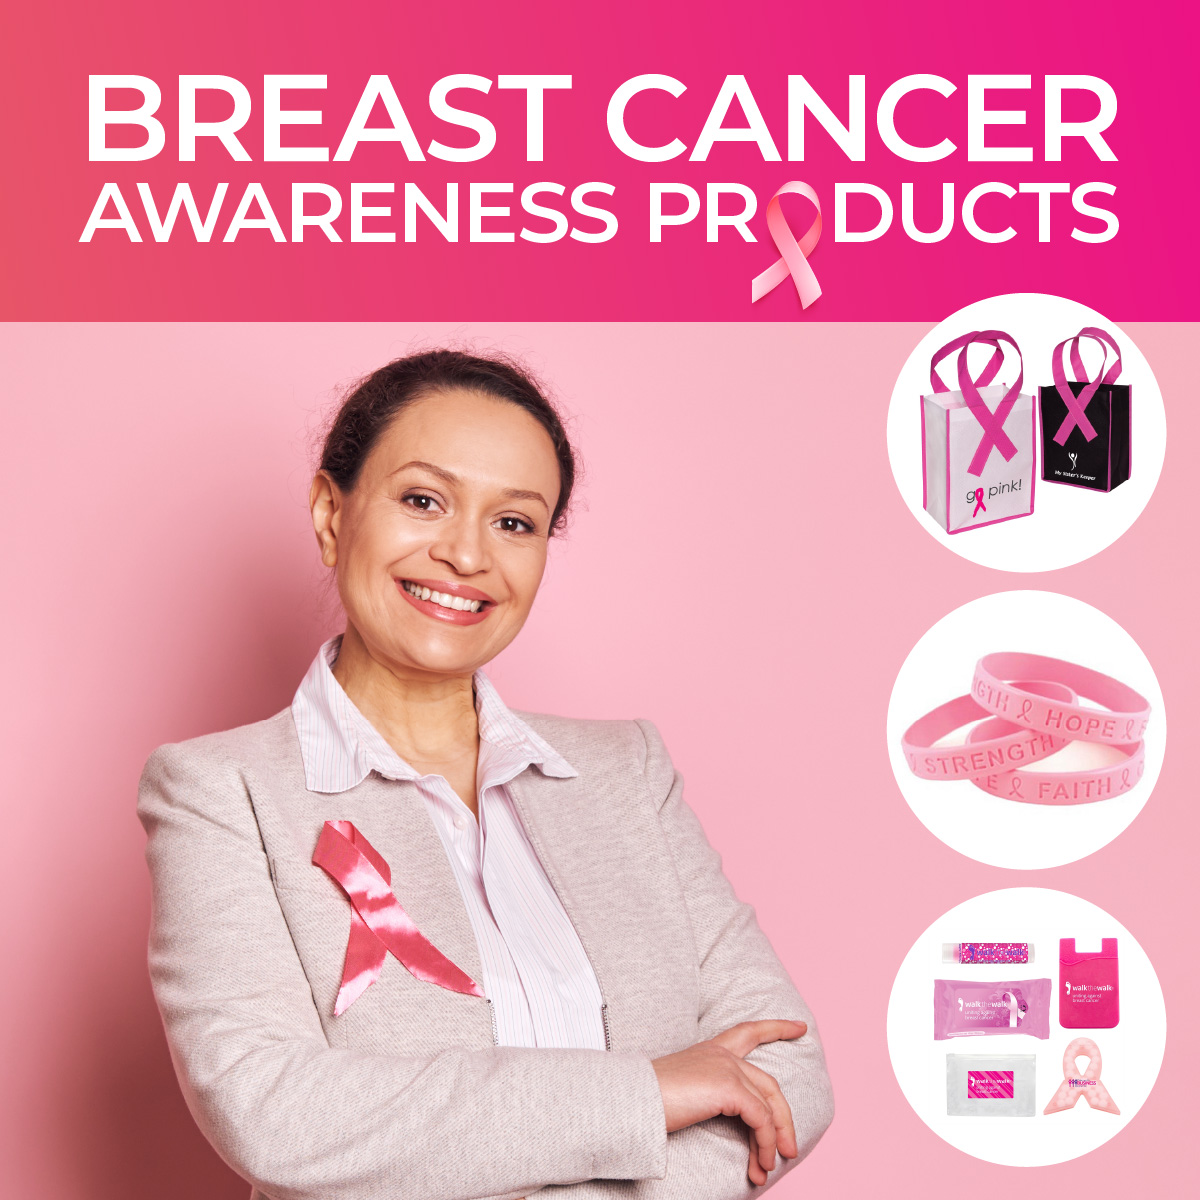 Breast cancer awareness products